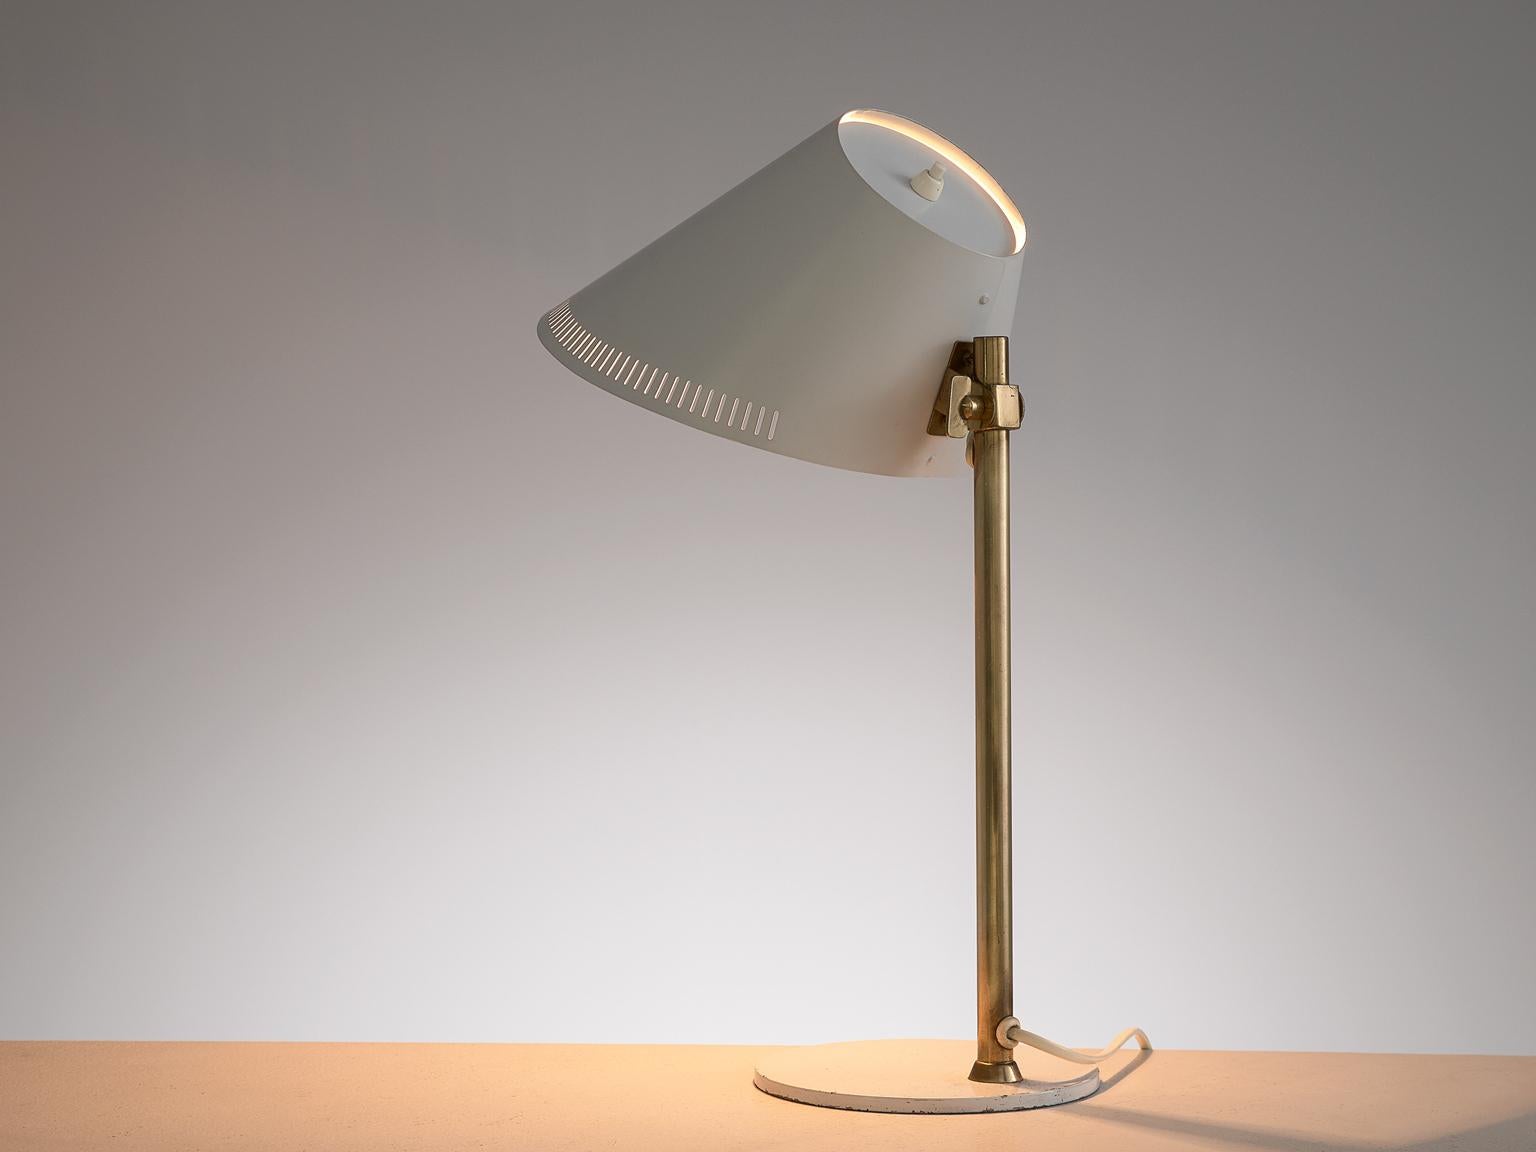 Paavo Tynell for Idman, desk light, white enameled metal and brass, Finland, 1950s.

Beautiful designed '9227' table lamp by Finnish designer Paavo Tynell for Idman. This model features a very refined design that shows Tynell's style perfectly.